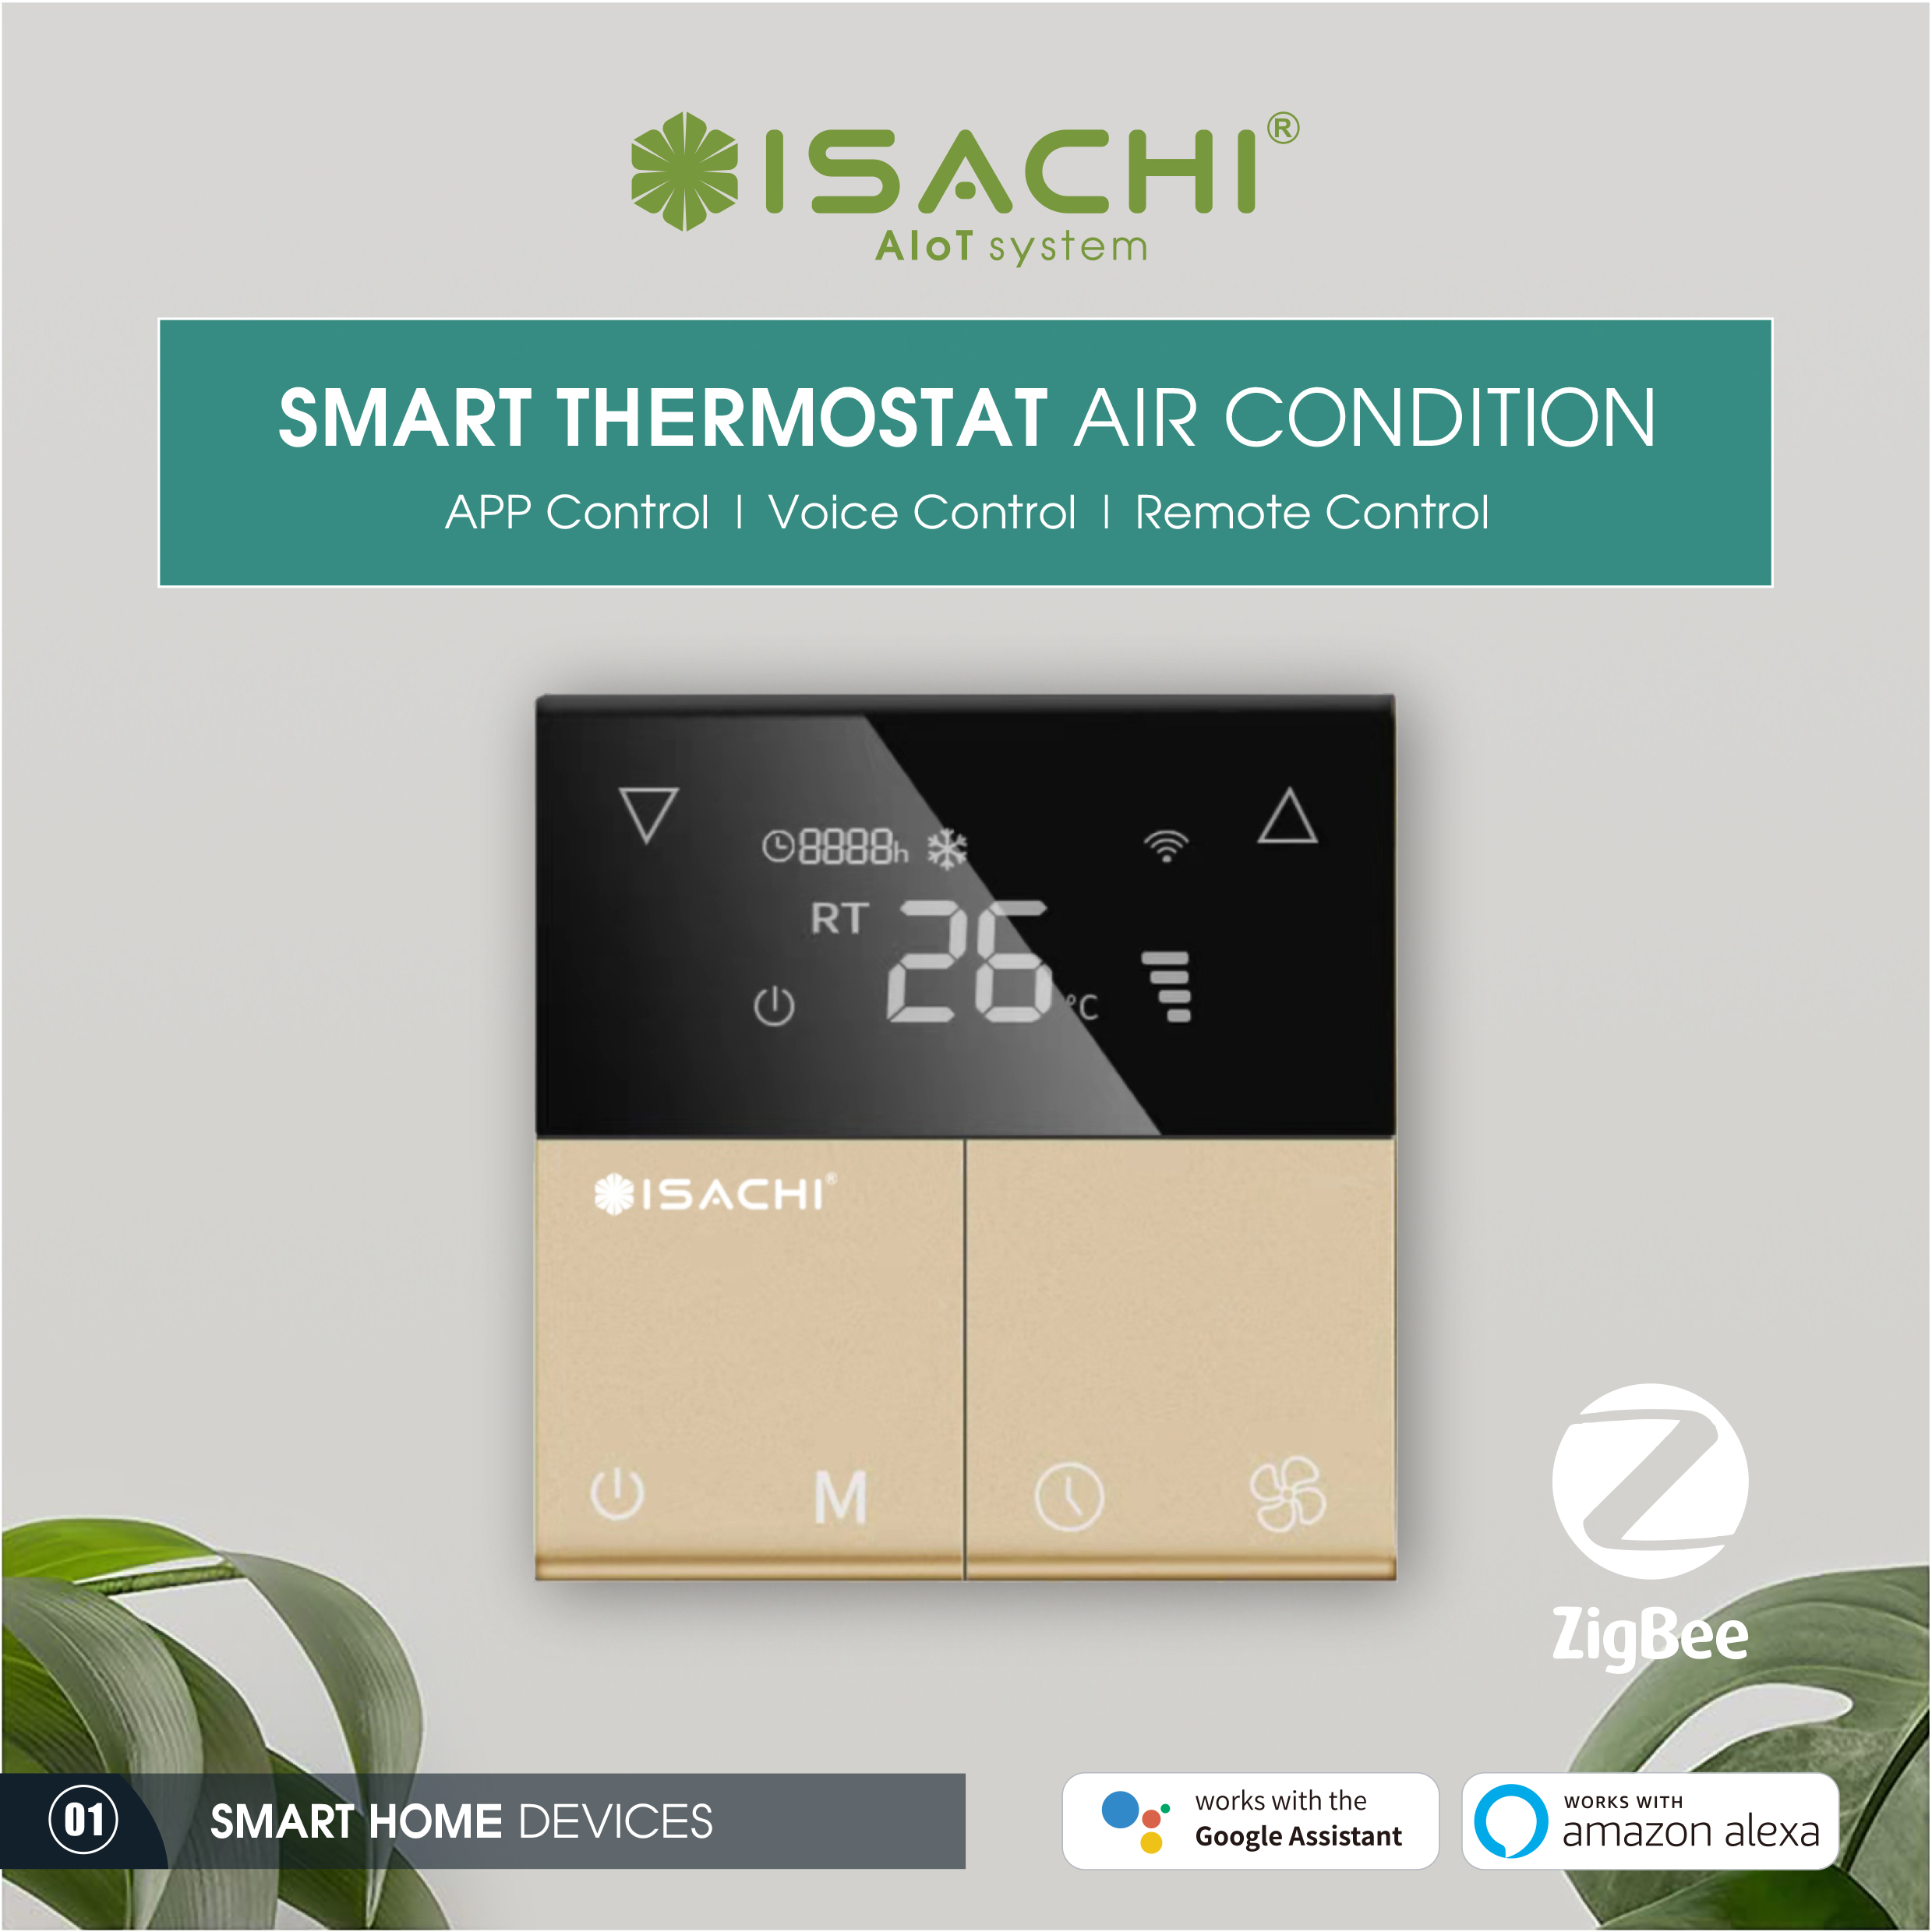 Smart Thermostat Air Condition